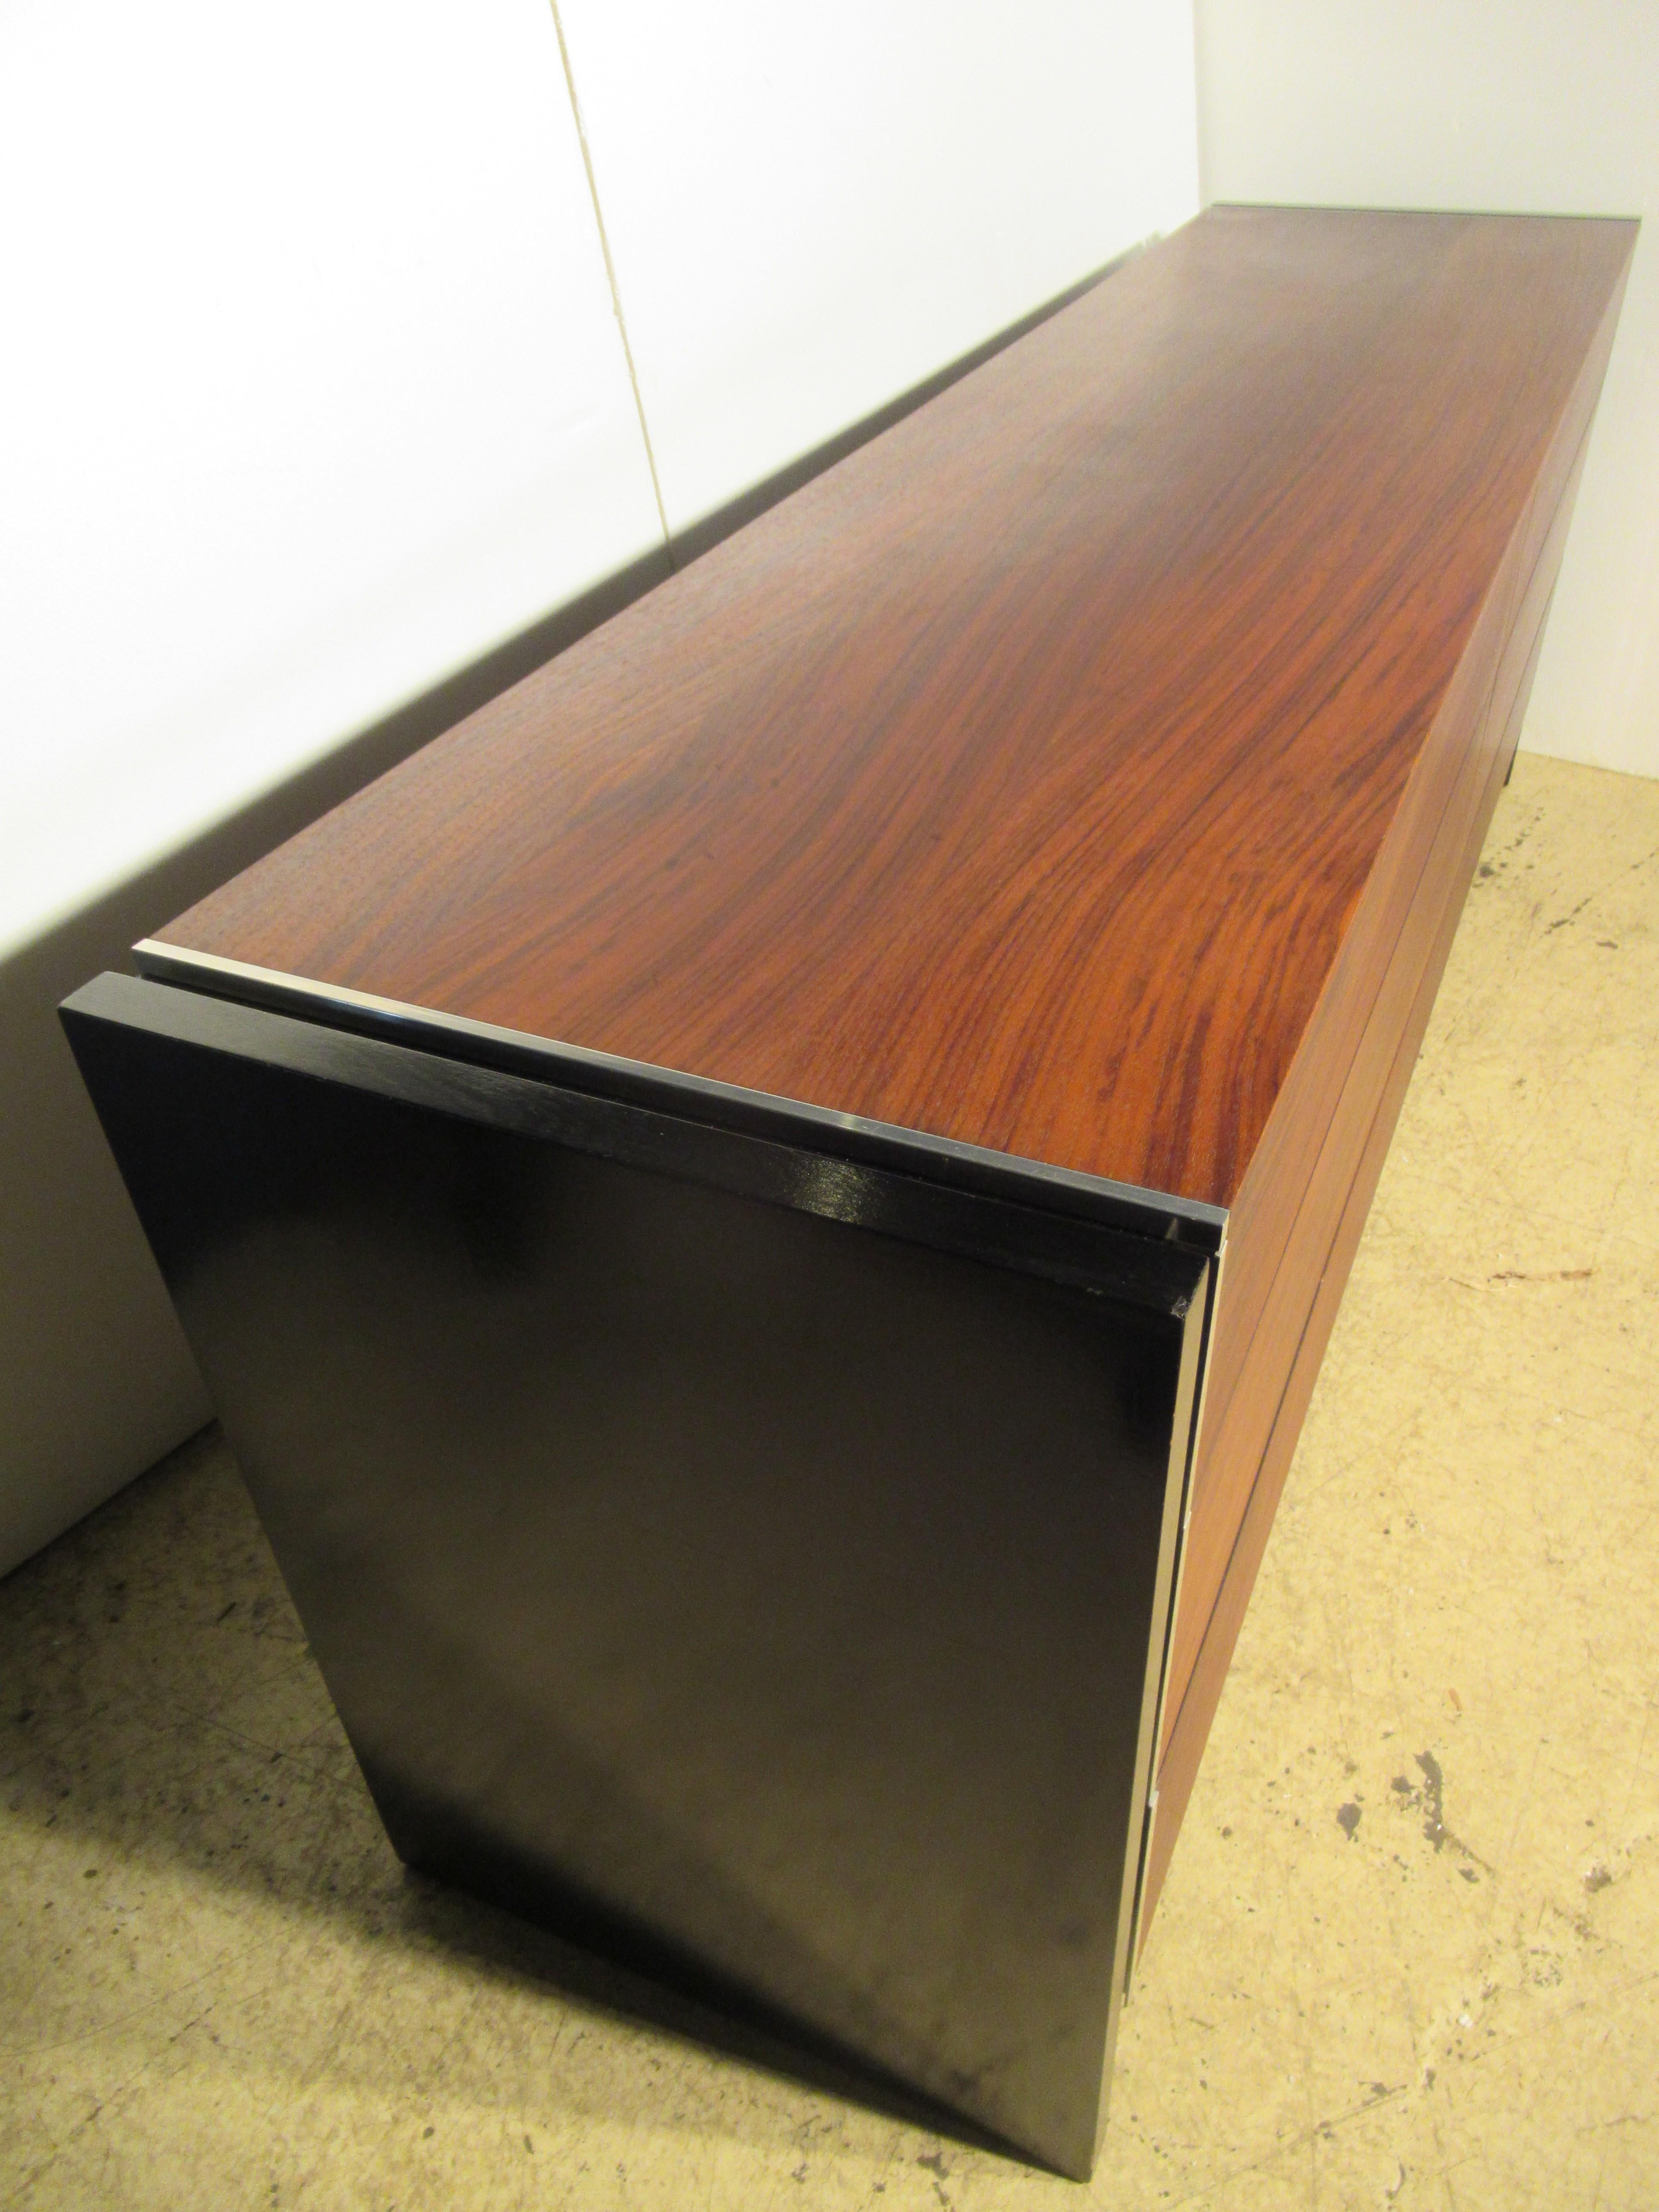 Long sleek minimalist dresser credenza having six-book matched richly grained rosewood drawers with finely machined polished aluminium fittings / a rosewood top and ebonized oak sides - designed by Robert Baron for Glenn of California and retailed